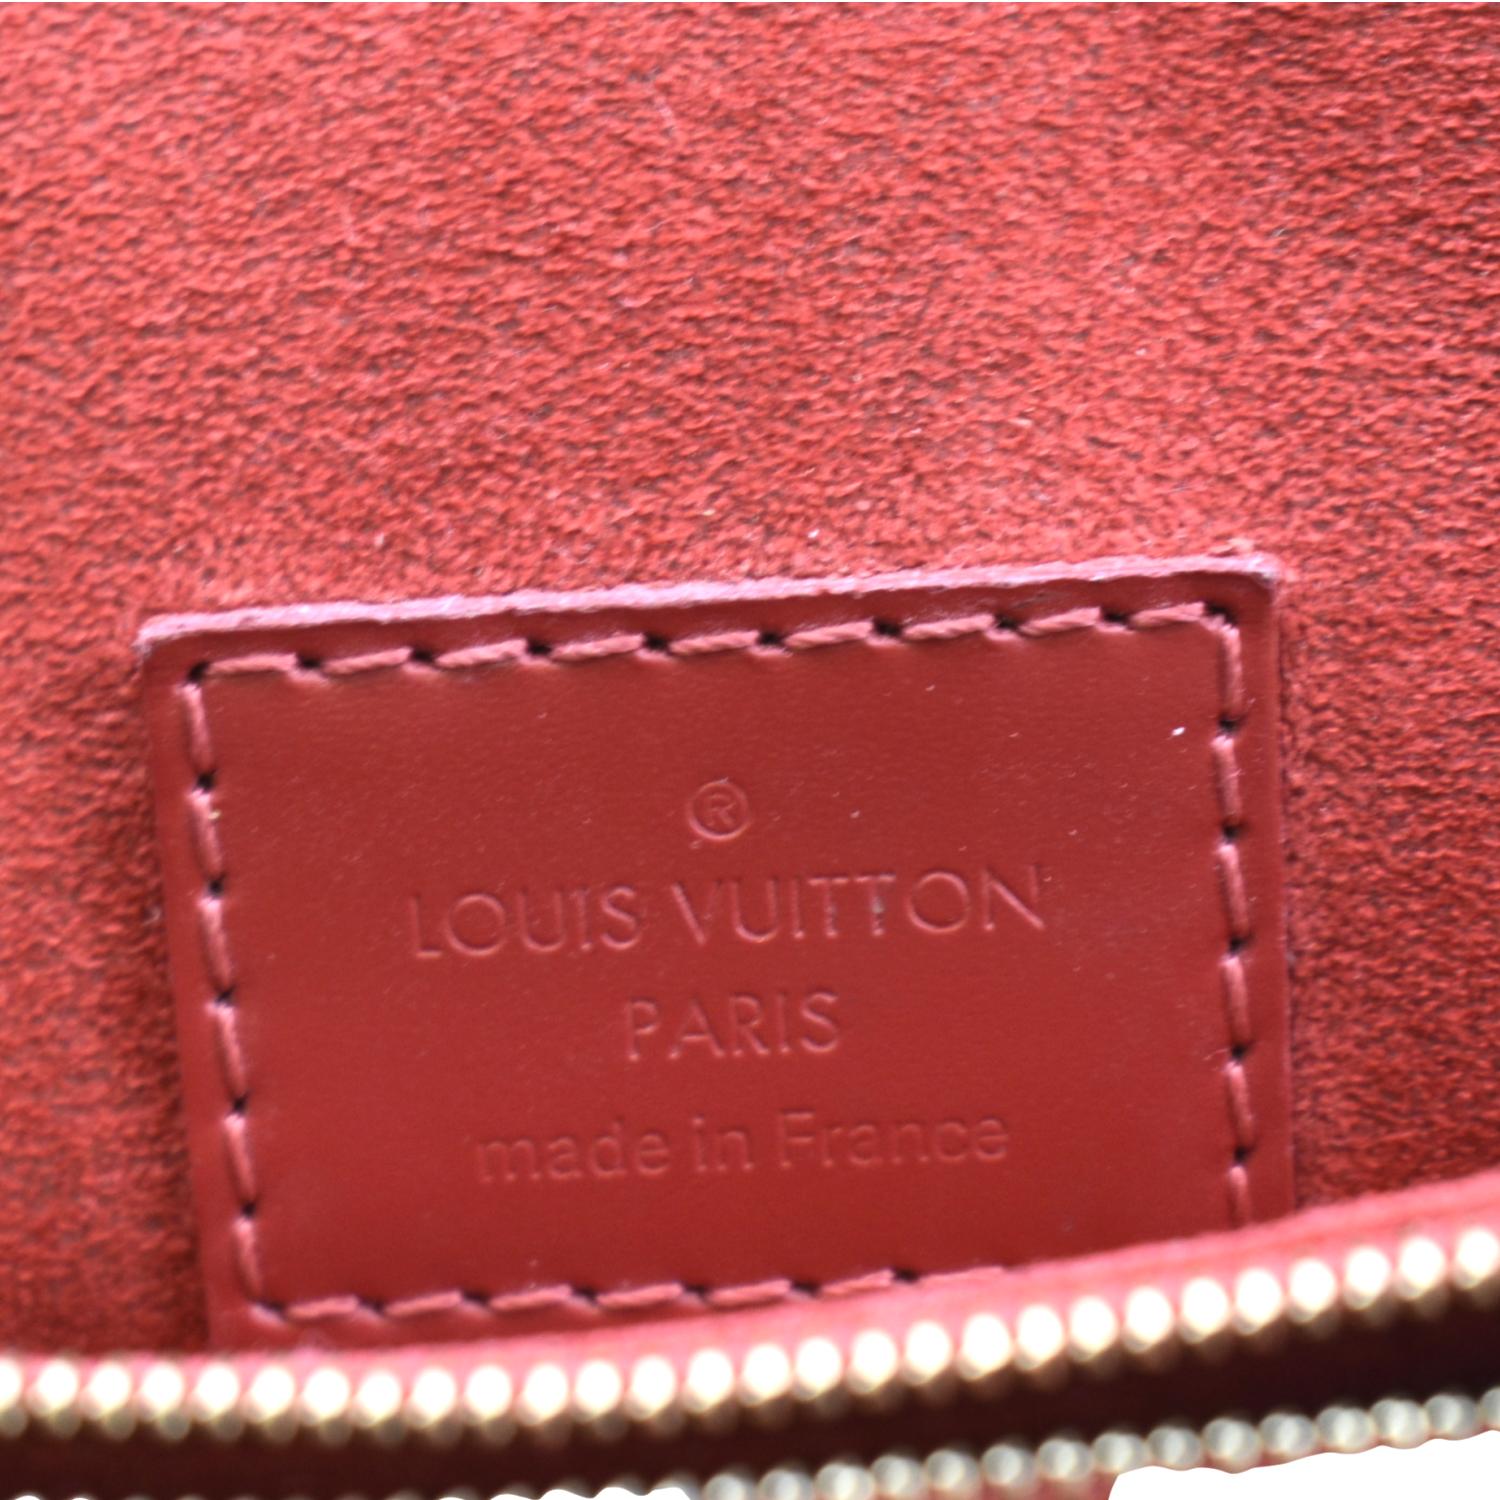 ✨LOUIS VUITTON✨ Caissa clutch bag Selling $2250 Discontinued style Comes  with full set Perfect condition